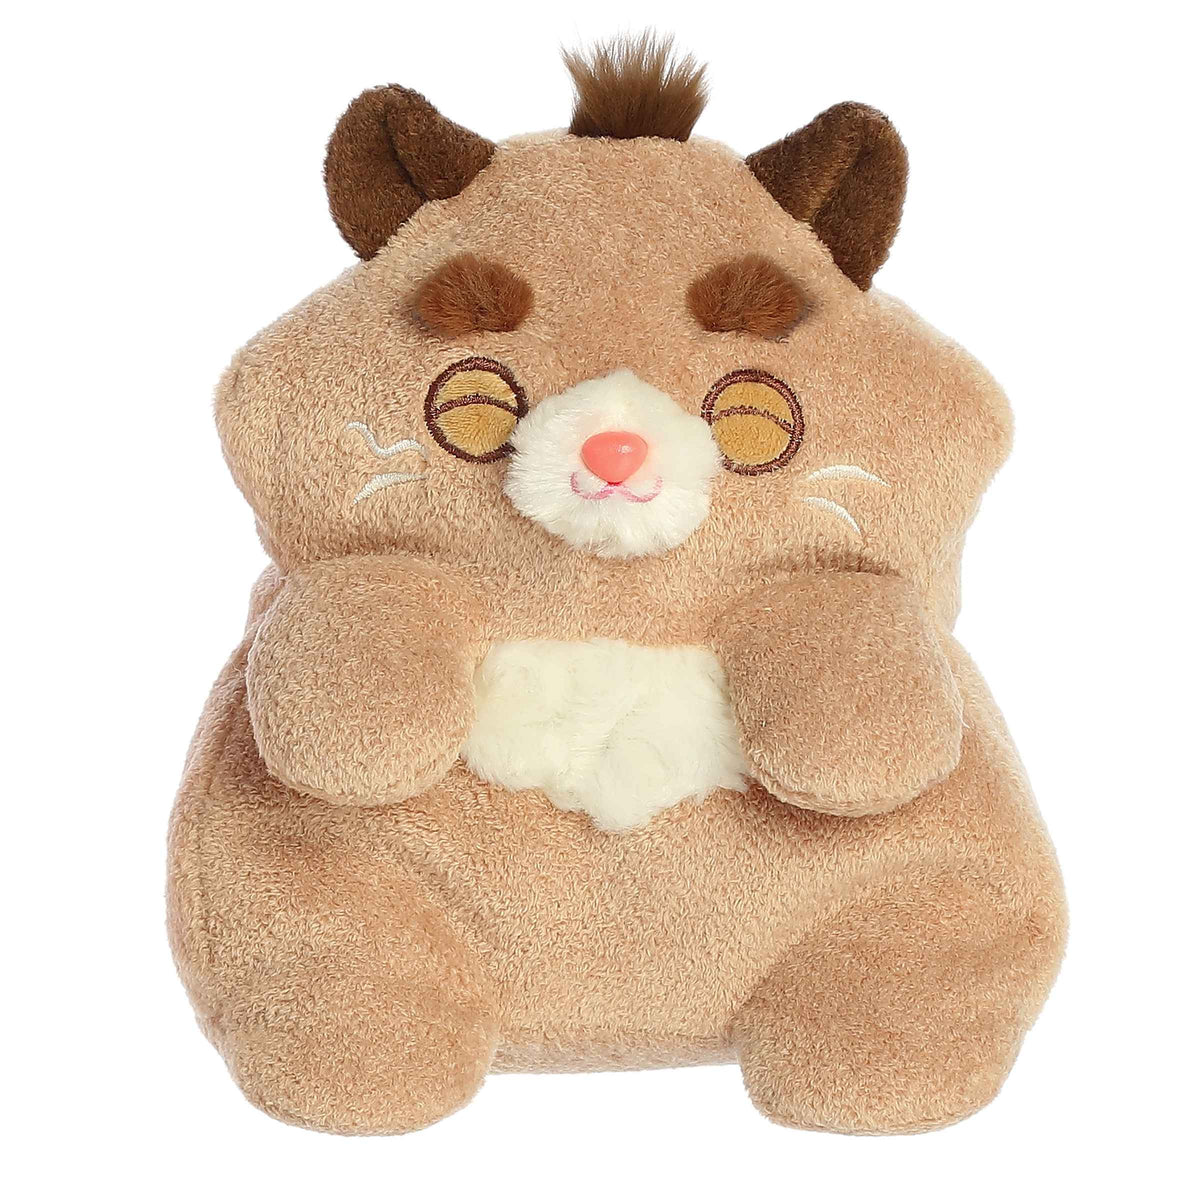 Siesta plush from MewMews, caramel fur with whimsical closed eyes, soft white belly, with personality booklet and sticker